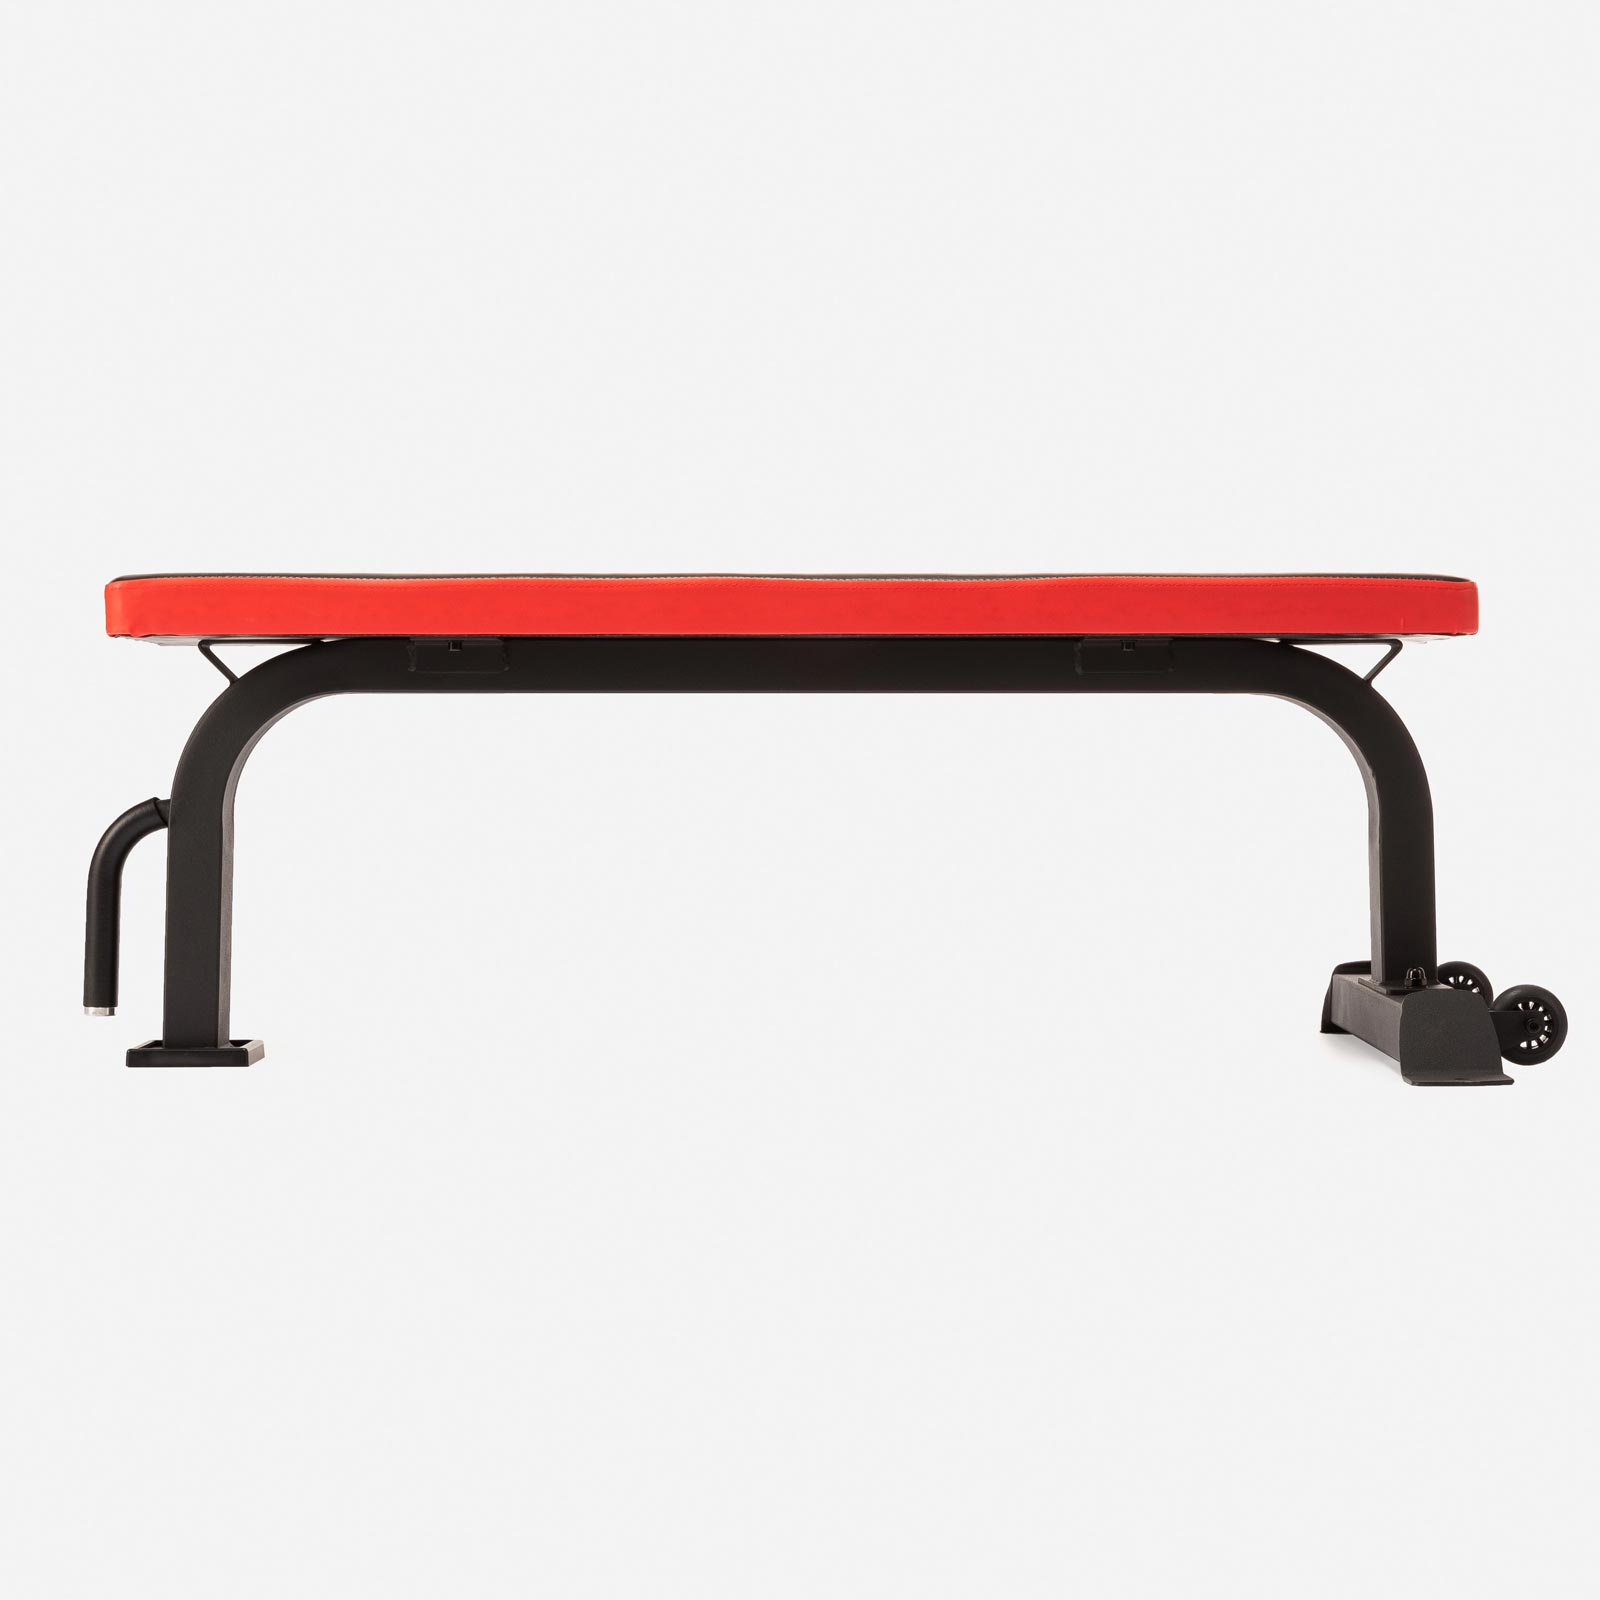 RIVAL B4 FLAT WEIGHT BENCH